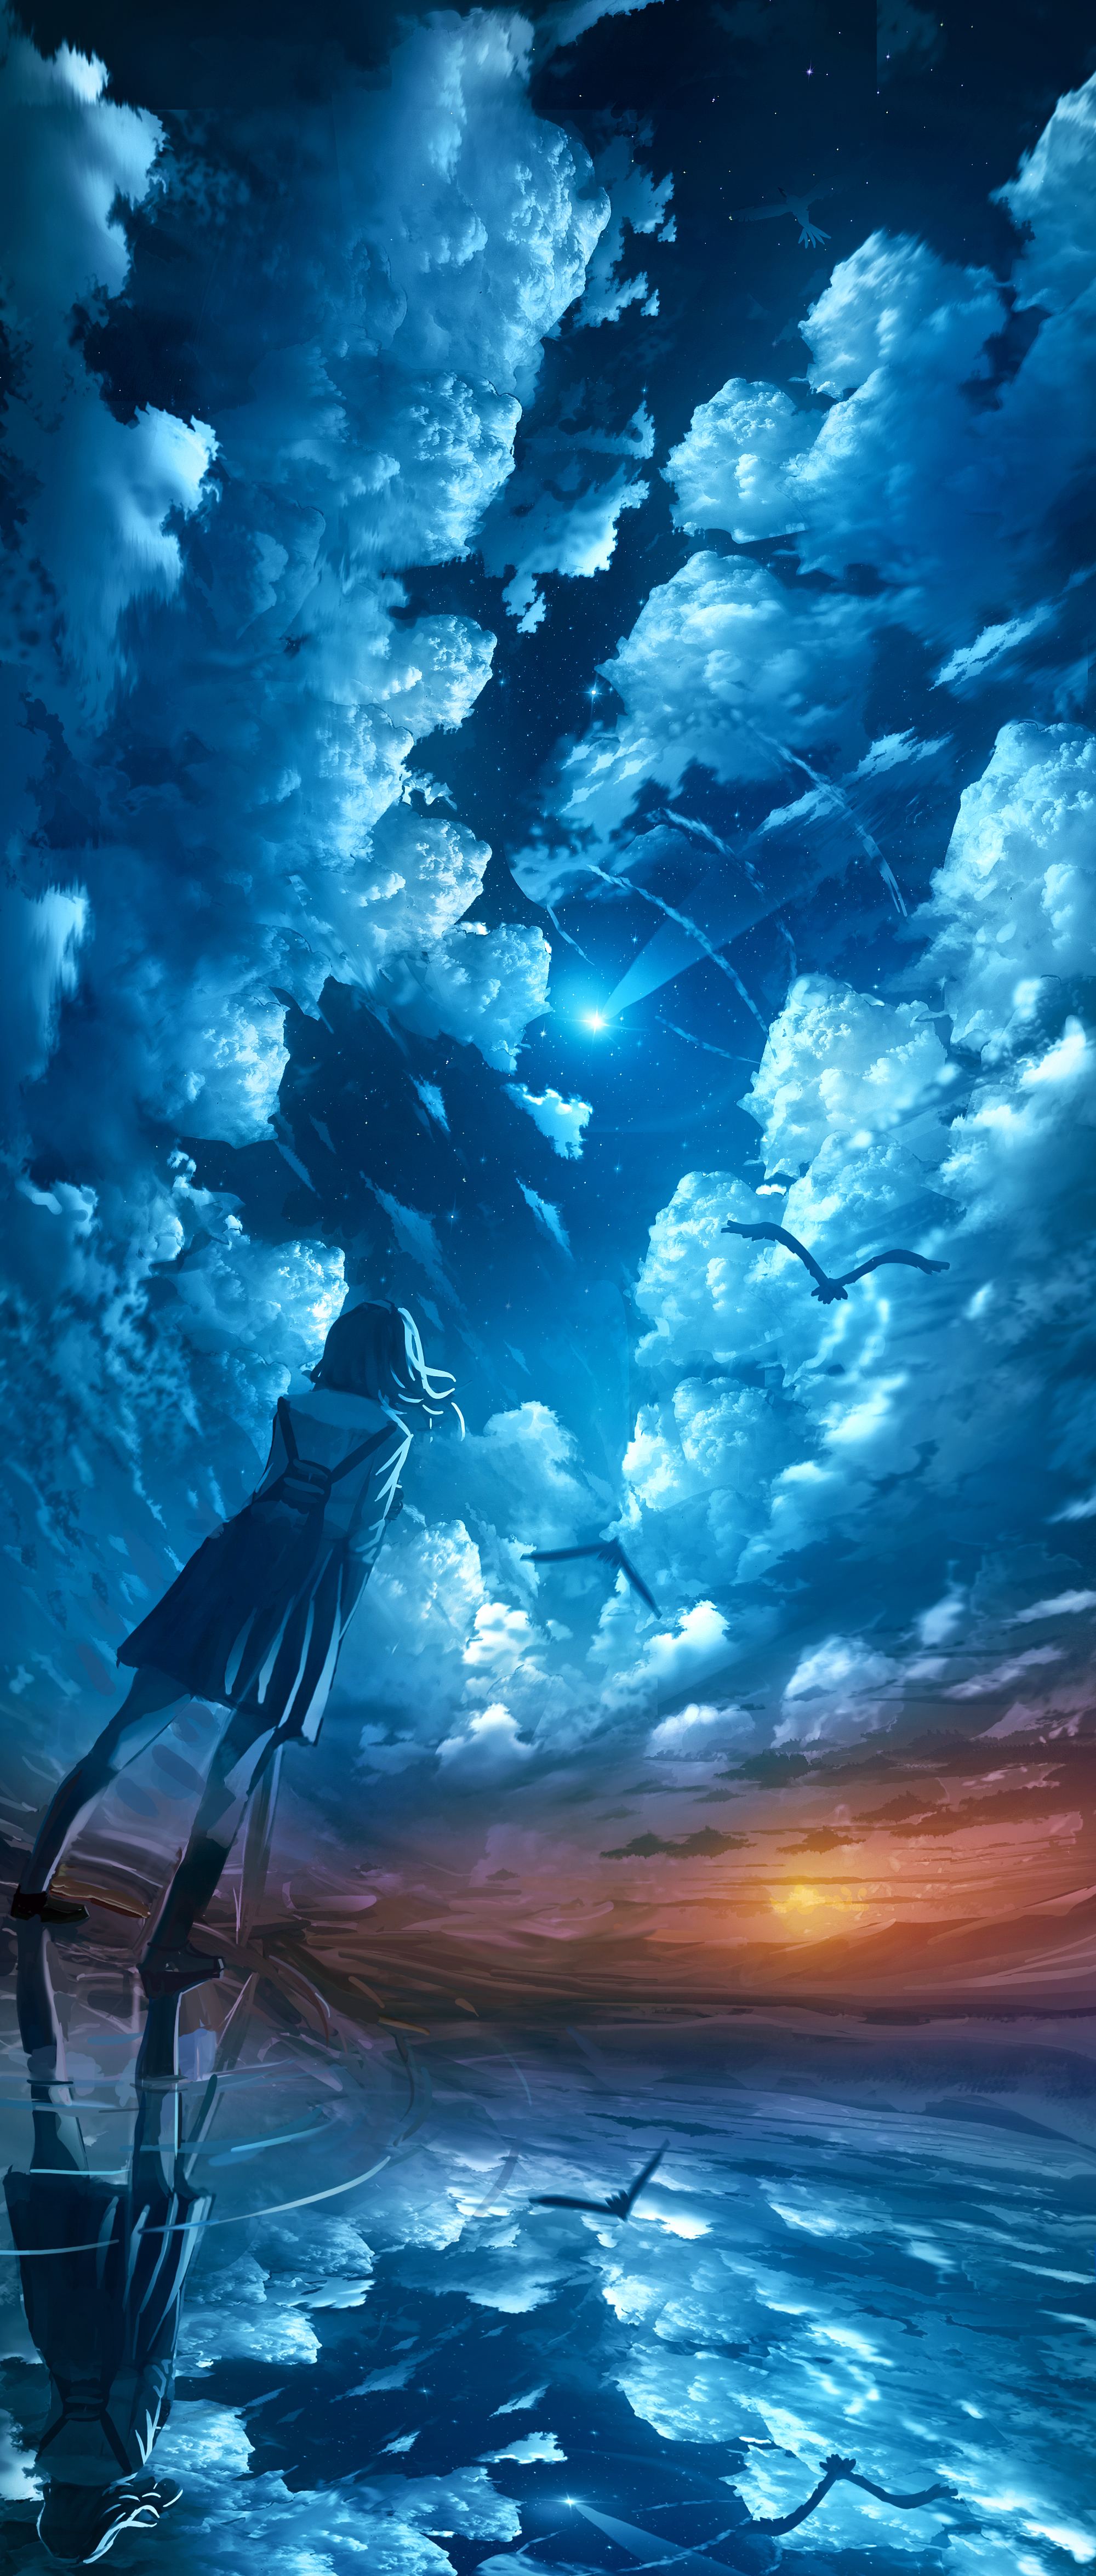 Anime 2000x4700 original characters birds sky clouds water portrait display reflection low-angle shooting stars starred sky starry night cumulus rear view Kenzo 093 ripples standing mountains skirt knee-highs night evening women outdoors sunset anime girls short hair hair blowing in the wind looking into the distance